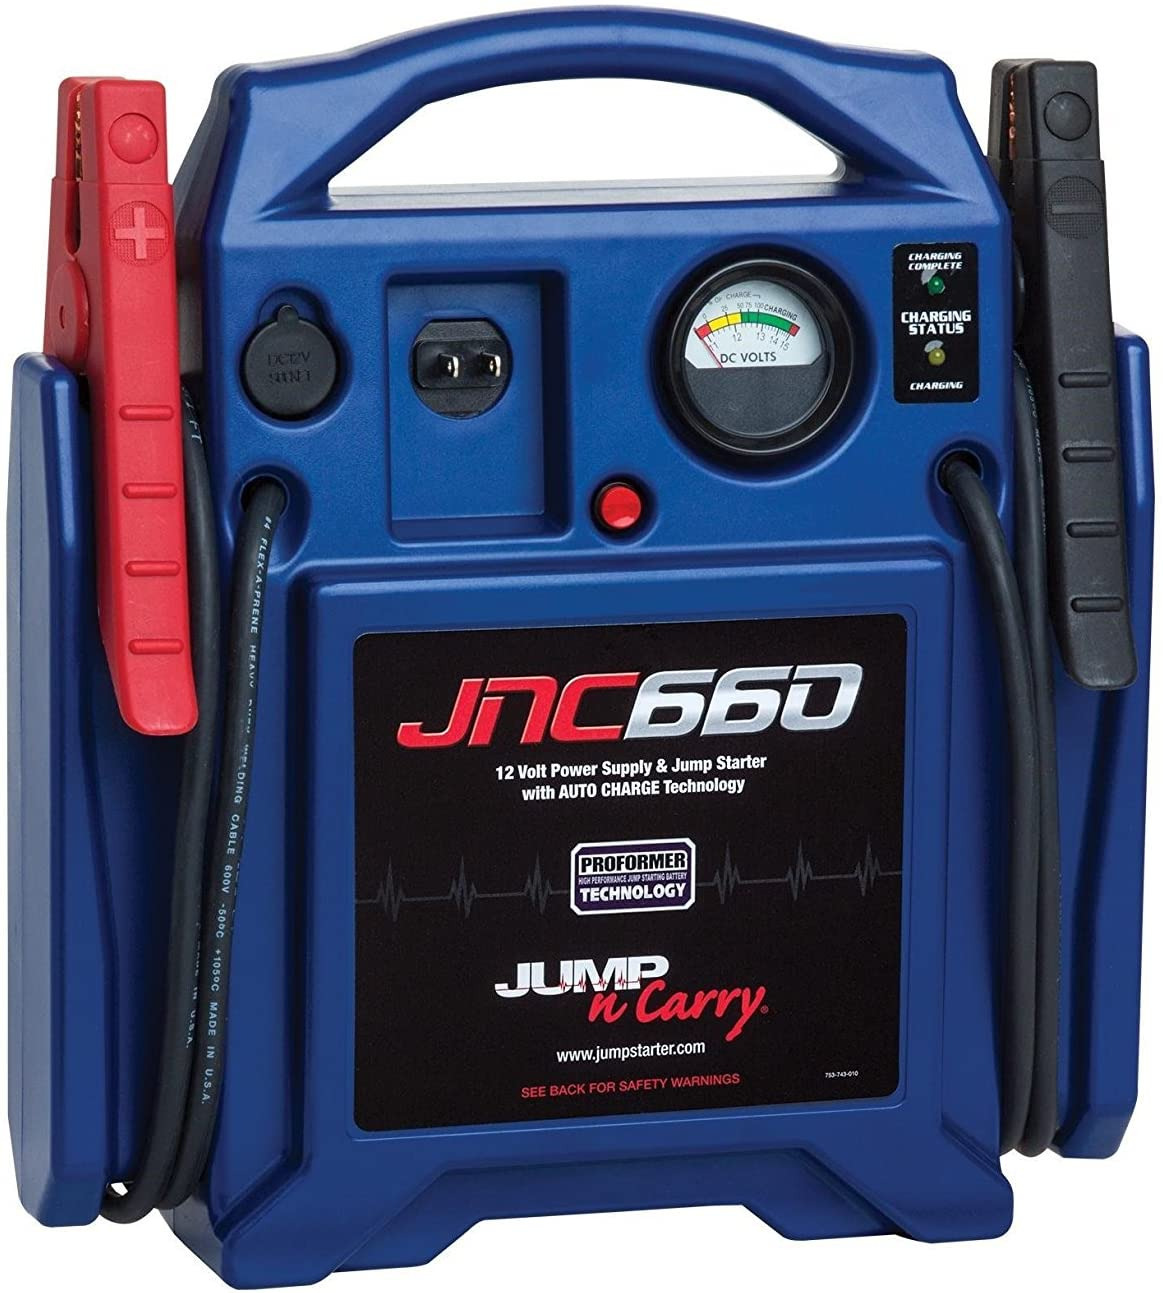 Jump-N-Carry JNC660 - 1700 Peak Amp 12 Volt Jump Starter with Cables and Battery